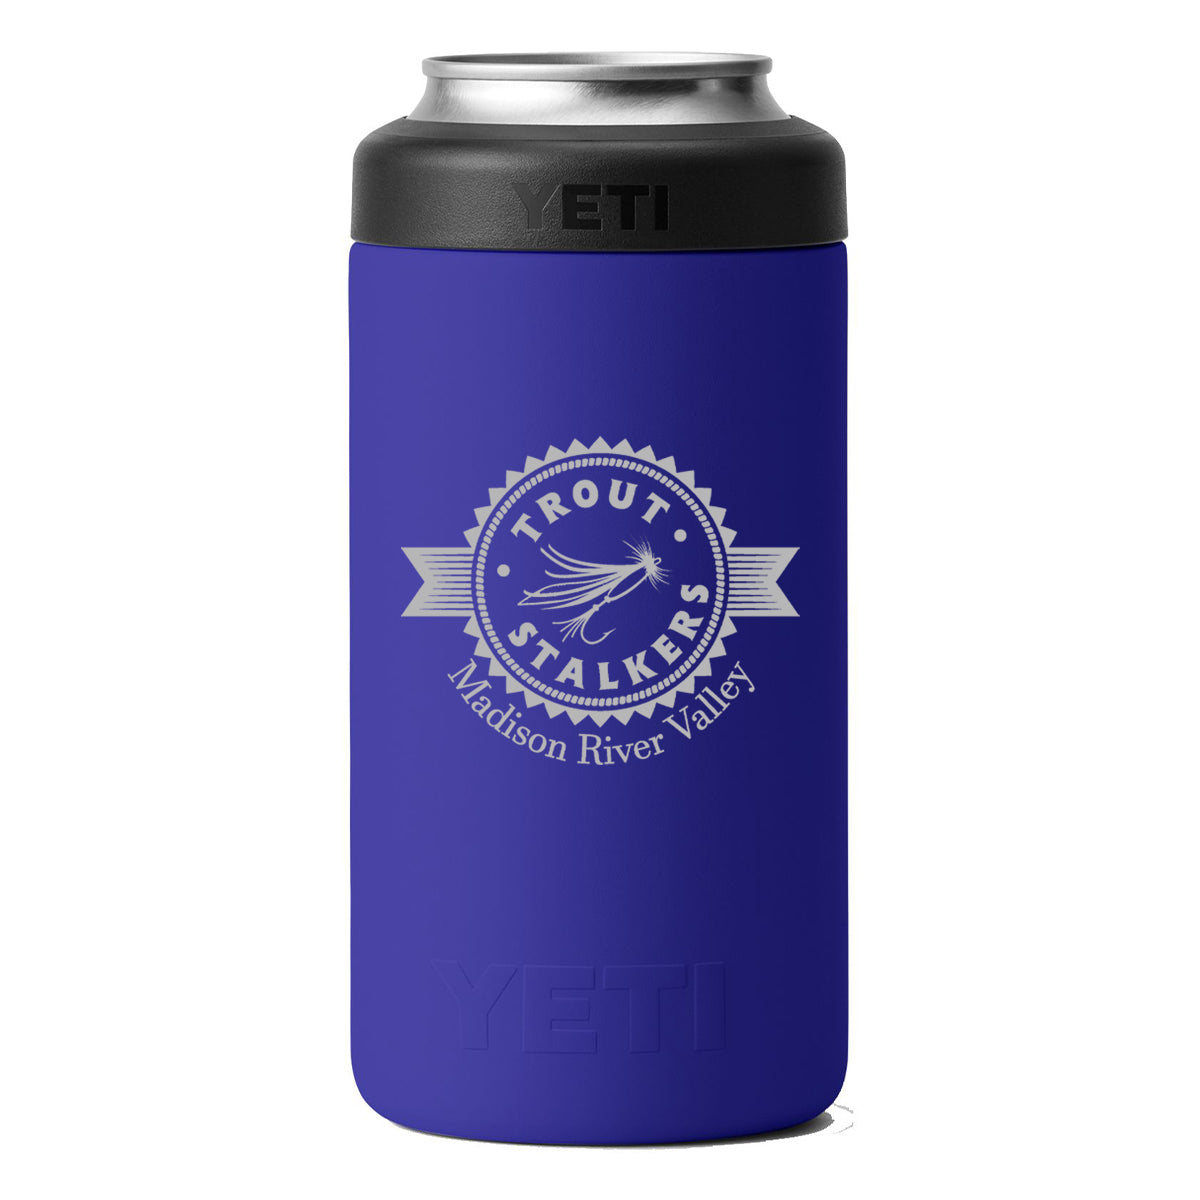 Offshore Blue gang! : r/YetiCoolers